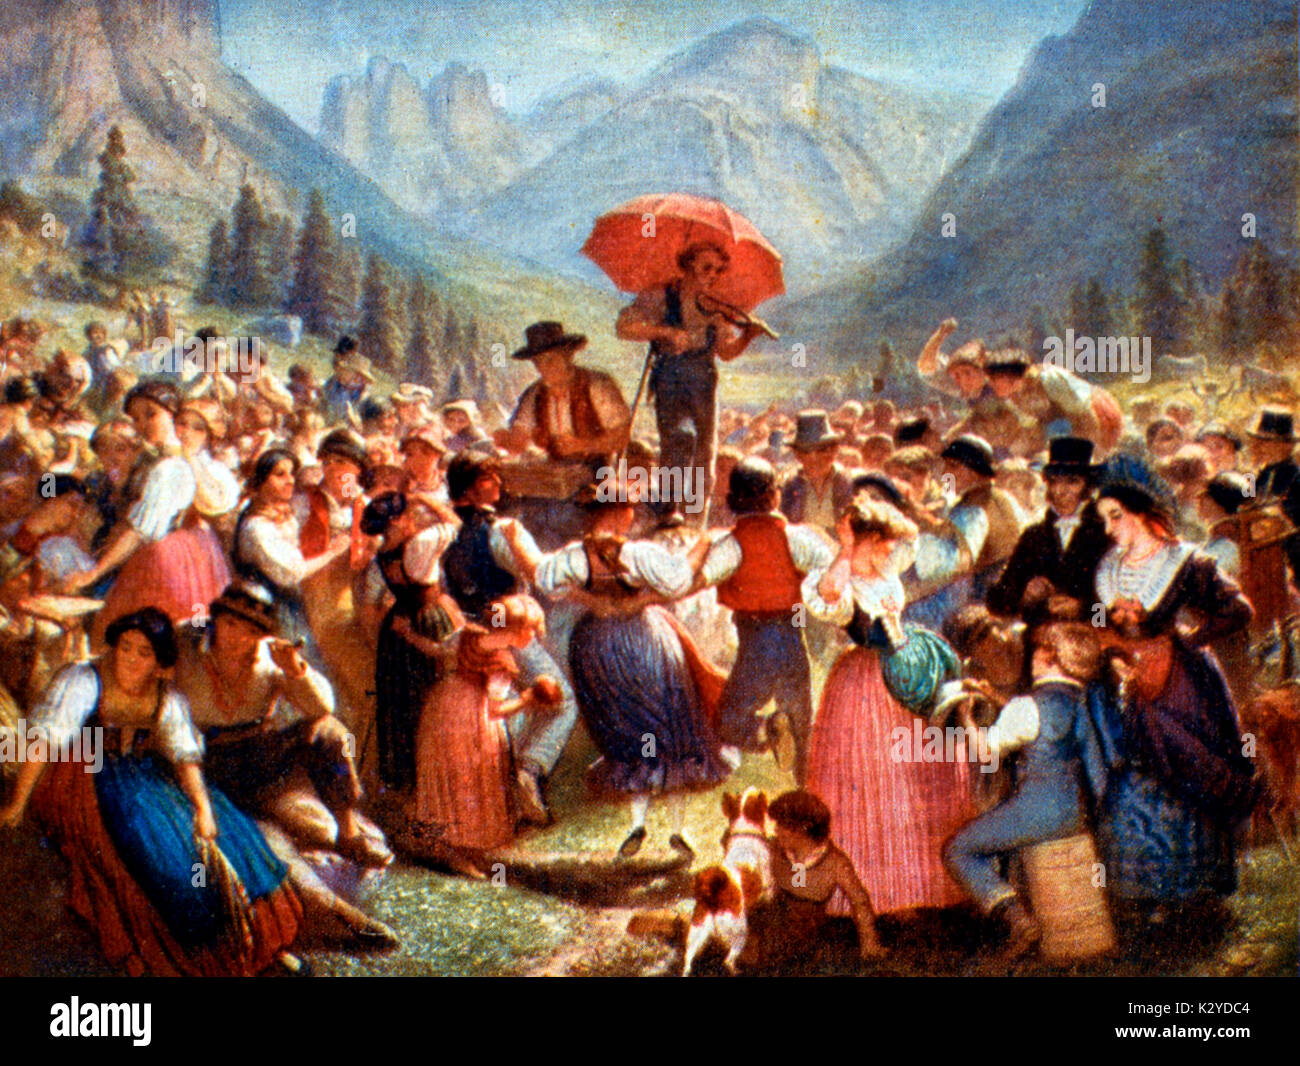 DANCE - SWITZERLAND Villagers dancing in the mountains folk dance - music on violin Stock Photo